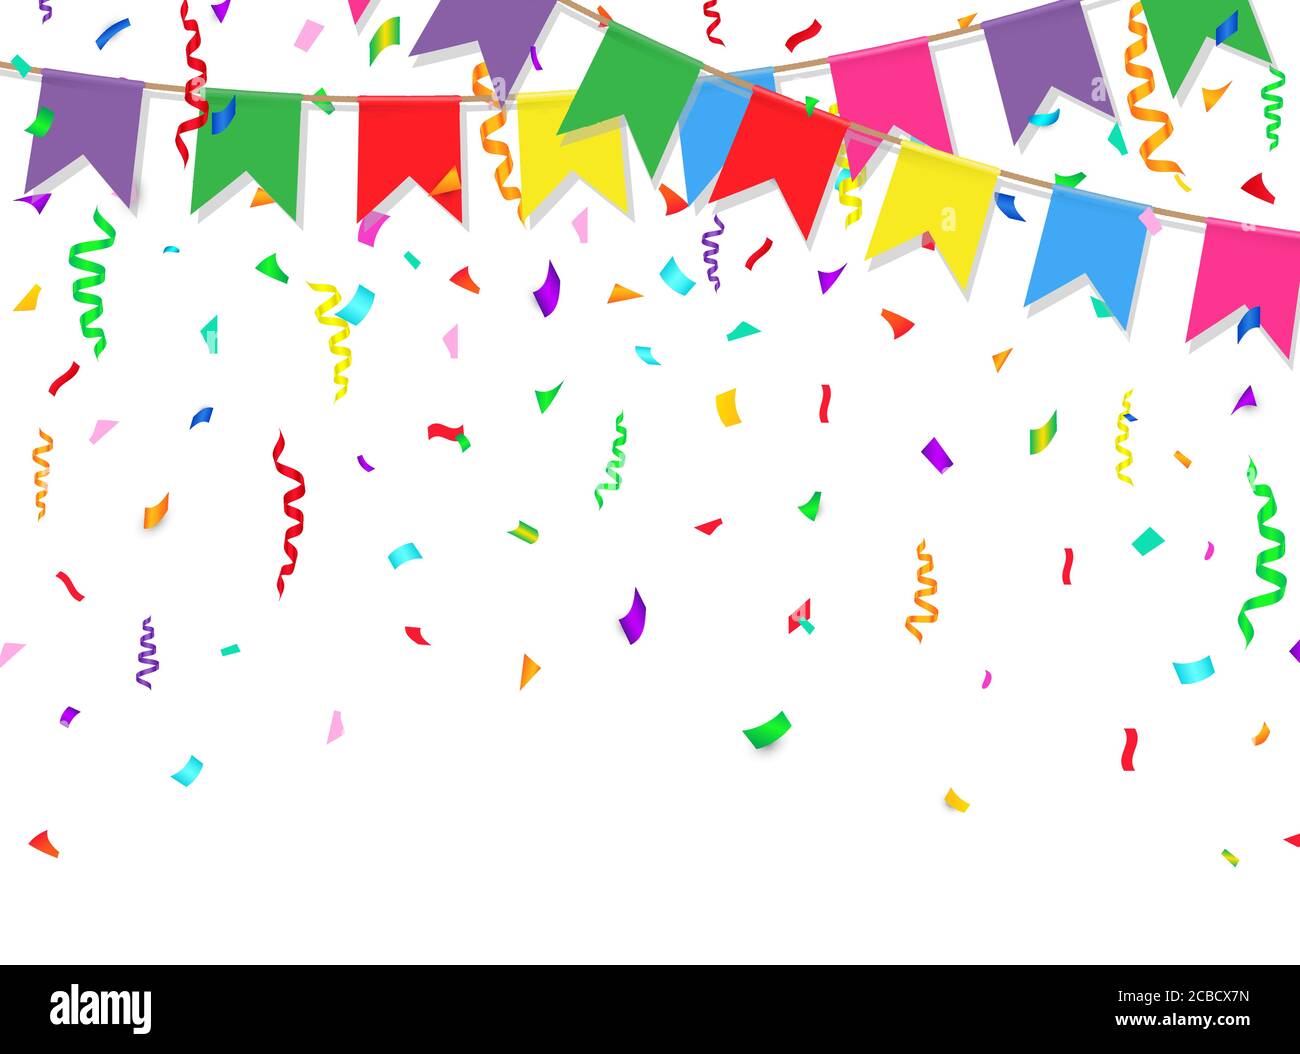 Celebration banner. Party flags with confetti on white background. Vector illustration. Stock Vector